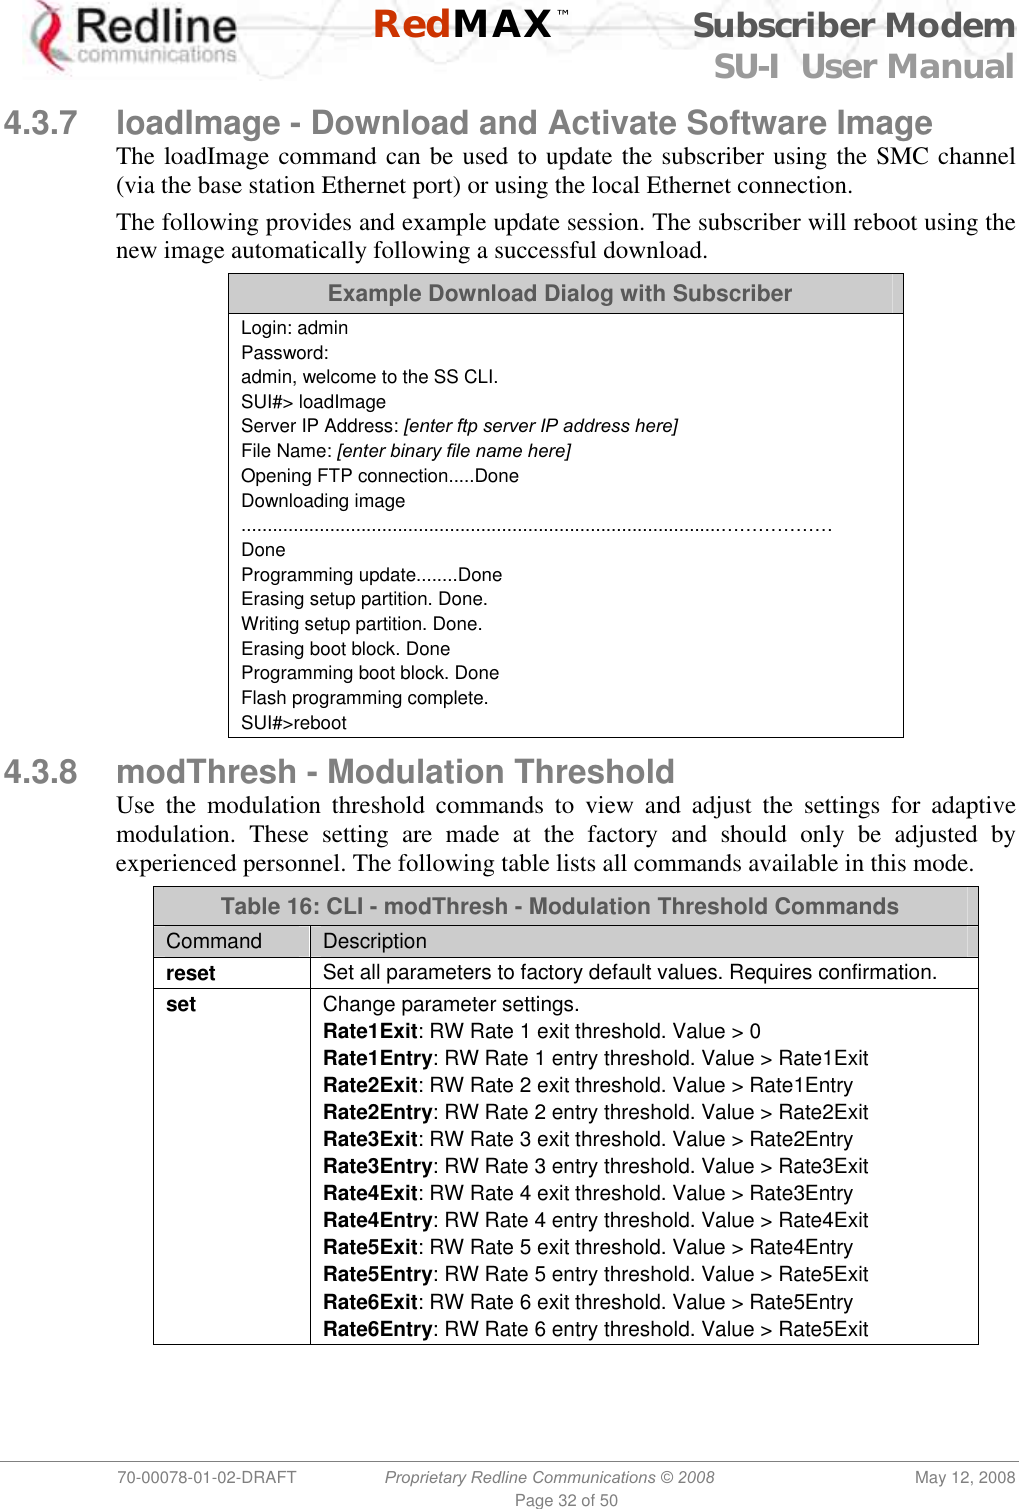    RedMAX™ Subscriber Modem SU-I  User Manual  70-00078-01-02-DRAFT  Proprietary Redline Communications © 2008  May 12, 2008 Page 32 of 50  4.3.7  loadImage - Download and Activate Software Image The loadImage command can be used to update the subscriber using the SMC channel (via the base station Ethernet port) or using the local Ethernet connection. The following provides and example update session. The subscriber will reboot using the new image automatically following a successful download. Example Download Dialog with Subscriber Login: admin Password: admin, welcome to the SS CLI. SUI#&gt; loadImage Server IP Address: [enter ftp server IP address here] File Name: [enter binary file name here] Opening FTP connection.....Done Downloading image  ............................................................................................……………… Done Programming update........Done Erasing setup partition. Done. Writing setup partition. Done. Erasing boot block. Done Programming boot block. Done Flash programming complete. SUI#&gt;reboot   4.3.8  modThresh - Modulation Threshold Use the modulation threshold commands to view and adjust the settings for adaptive modulation. These setting are made at the factory and should only be adjusted by experienced personnel. The following table lists all commands available in this mode. Table 16: CLI - modThresh - Modulation Threshold Commands Command  Description reset Set all parameters to factory default values. Requires confirmation. set Change parameter settings. Rate1Exit: RW Rate 1 exit threshold. Value &gt; 0 Rate1Entry: RW Rate 1 entry threshold. Value &gt; Rate1Exit Rate2Exit: RW Rate 2 exit threshold. Value &gt; Rate1Entry Rate2Entry: RW Rate 2 entry threshold. Value &gt; Rate2Exit Rate3Exit: RW Rate 3 exit threshold. Value &gt; Rate2Entry Rate3Entry: RW Rate 3 entry threshold. Value &gt; Rate3Exit Rate4Exit: RW Rate 4 exit threshold. Value &gt; Rate3Entry Rate4Entry: RW Rate 4 entry threshold. Value &gt; Rate4Exit Rate5Exit: RW Rate 5 exit threshold. Value &gt; Rate4Entry Rate5Entry: RW Rate 5 entry threshold. Value &gt; Rate5Exit Rate6Exit: RW Rate 6 exit threshold. Value &gt; Rate5Entry Rate6Entry: RW Rate 6 entry threshold. Value &gt; Rate5Exit 